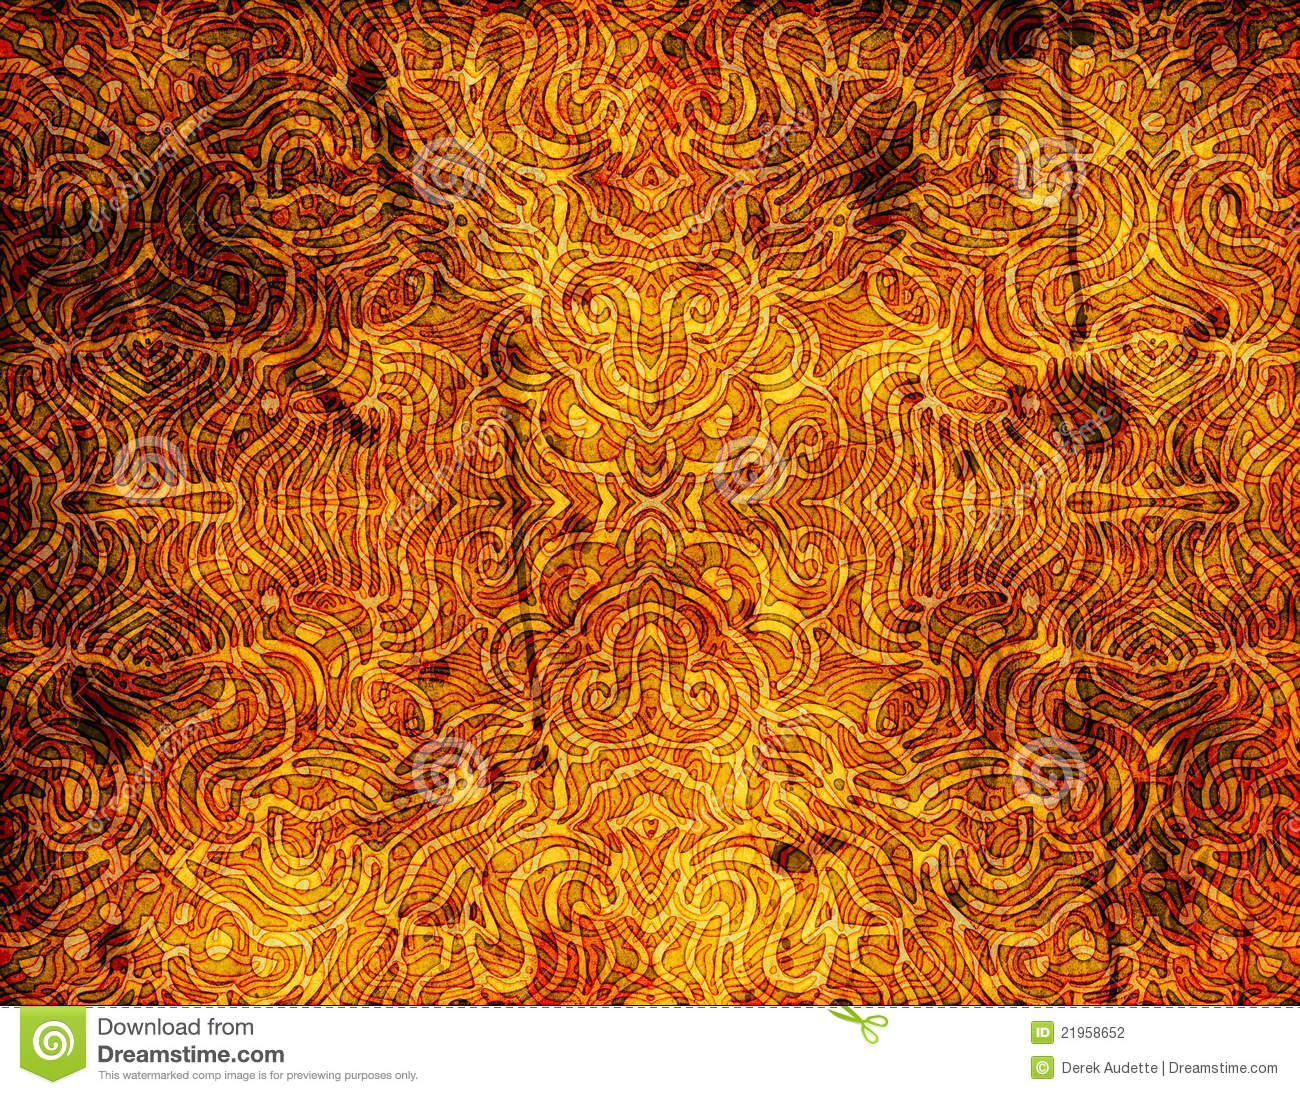 Pictures of Intricate Abstract Artwork